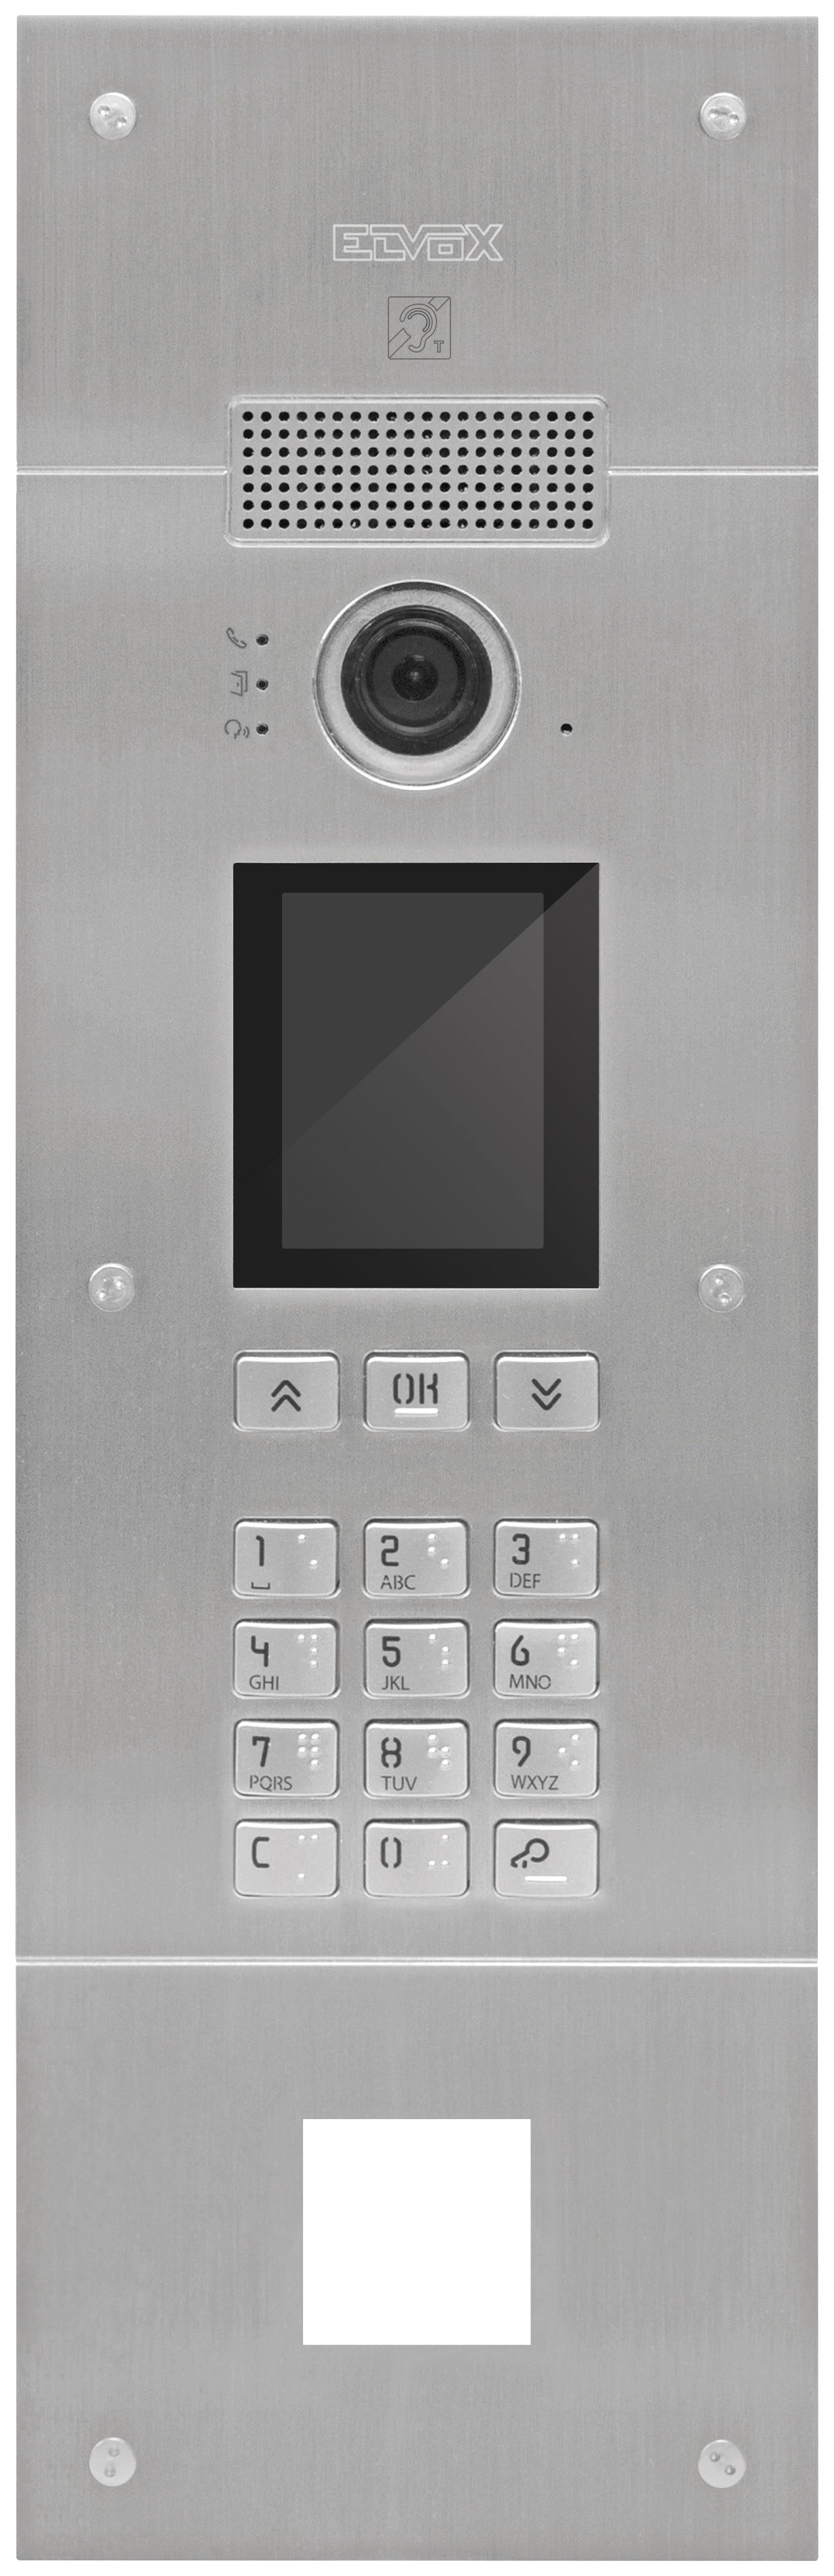 ELVOX PIXEL UP IP INTERCOM KEYPAD & VIDEO DOOR STATION SILVER APARTMENT 3.5 INCH DISPLAY LCD 320x480(65k) STAINLESS STEEL 48V POE SWITCH